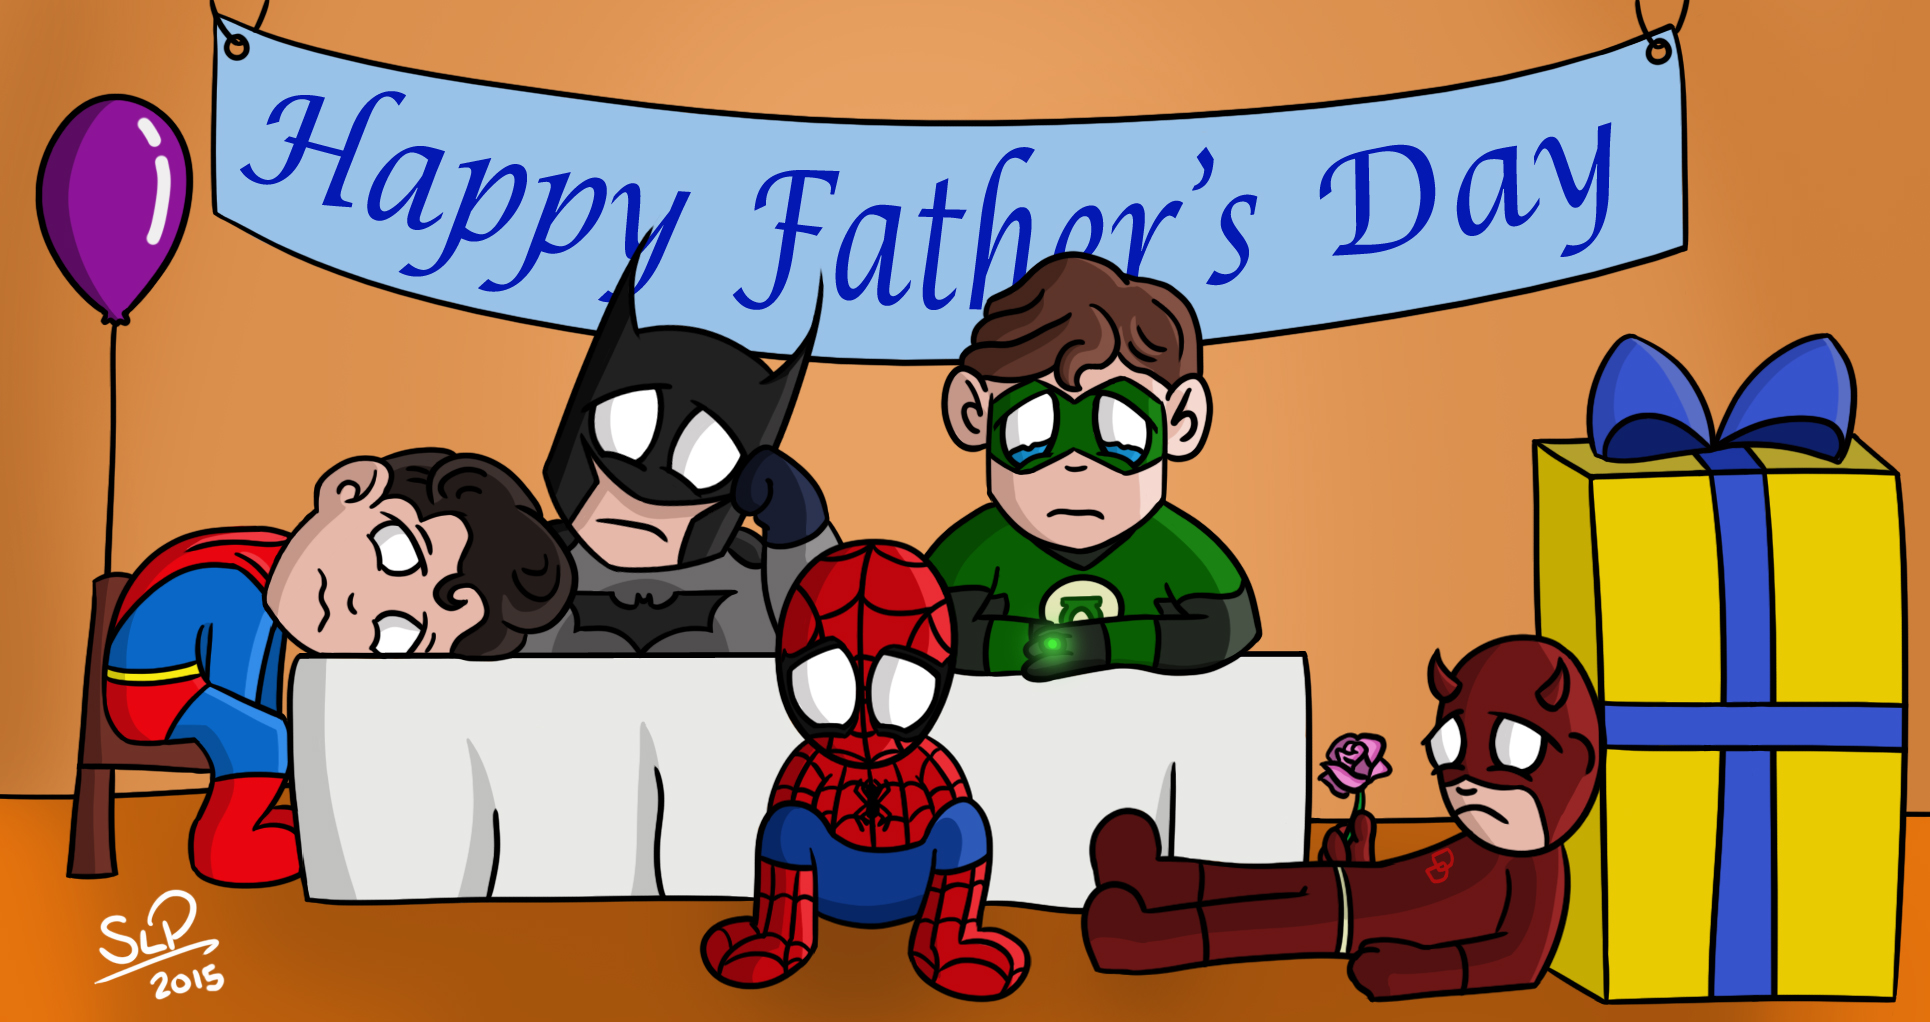 meme Father's day meme about happy fathers day humor - Happy Father's Day 2015